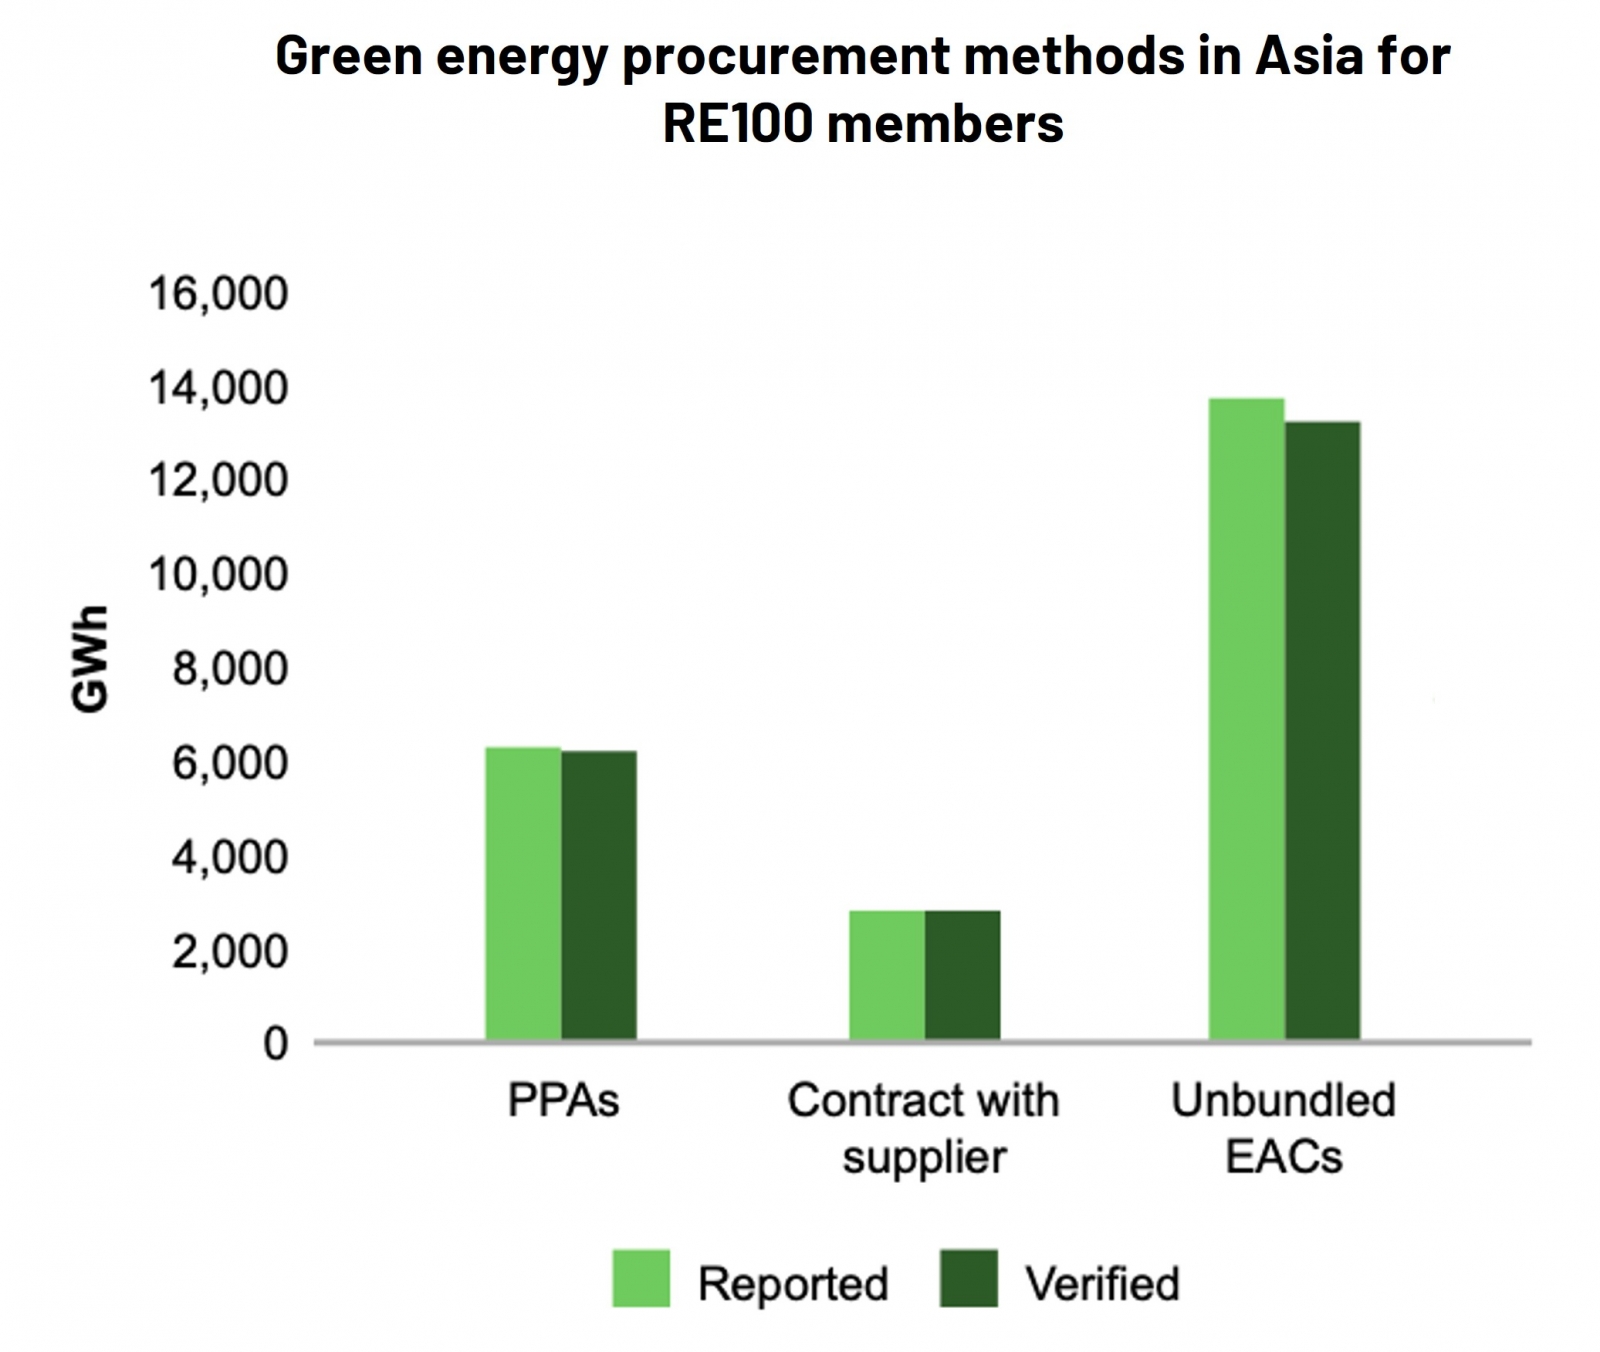 Green energy procurement methods in Asia for RE100 members